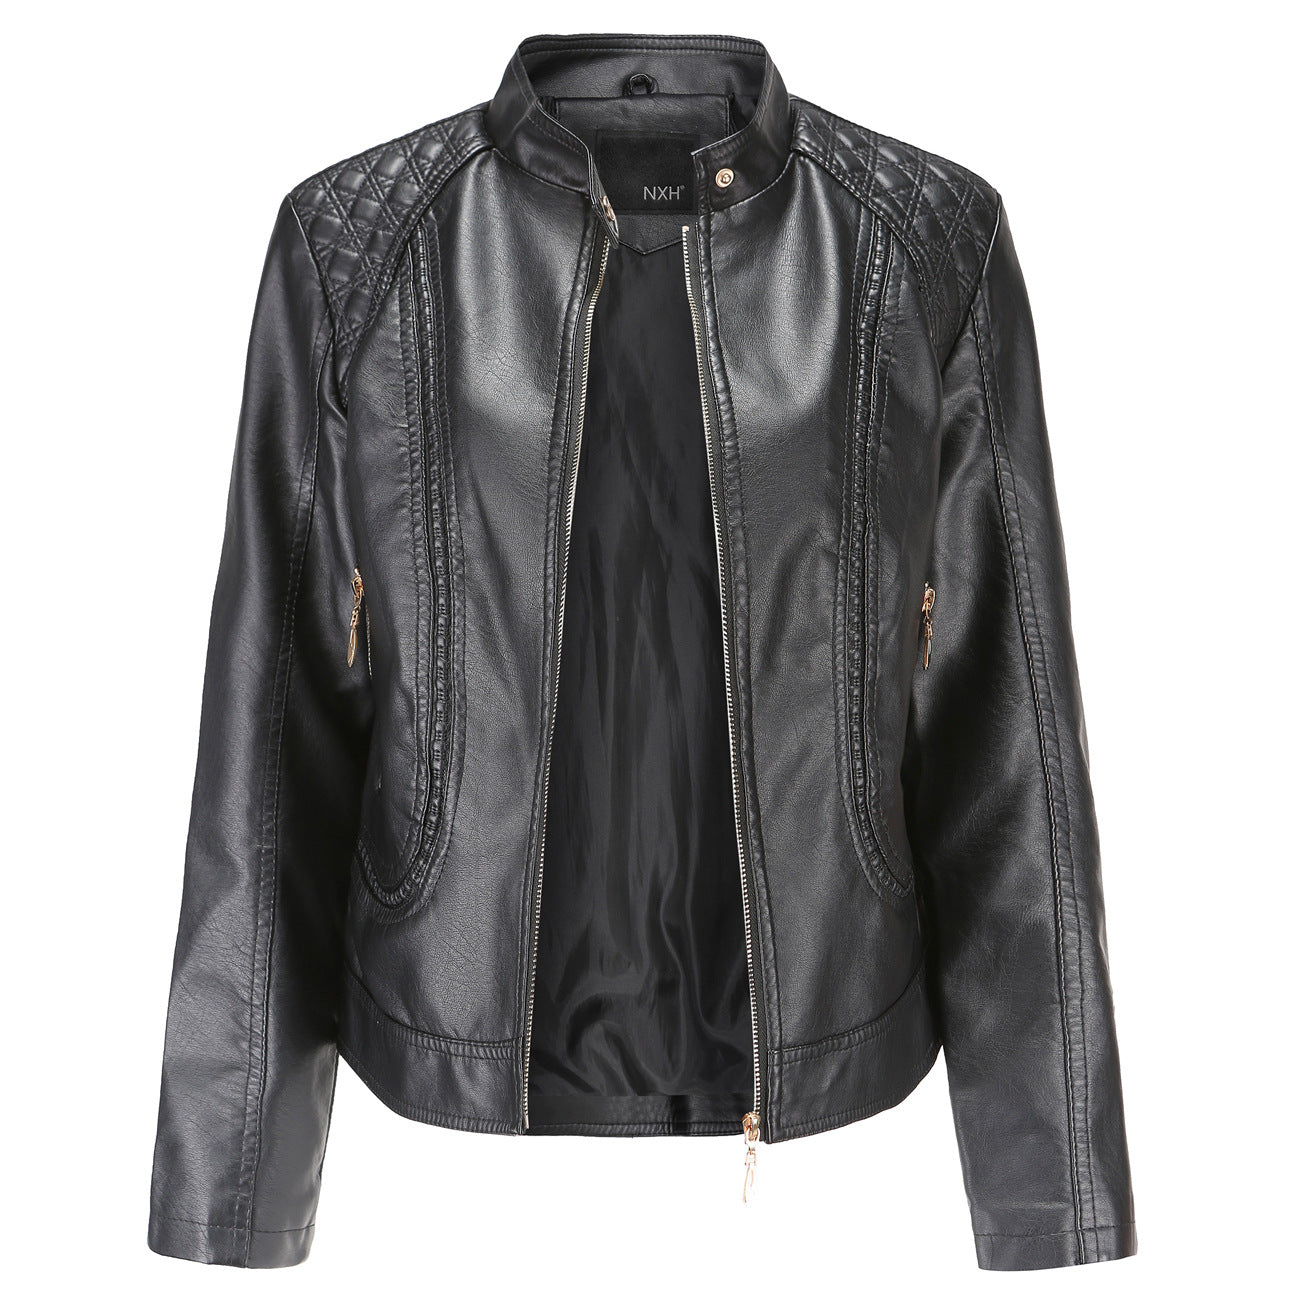 Leather Slim Collar Jacket For Women